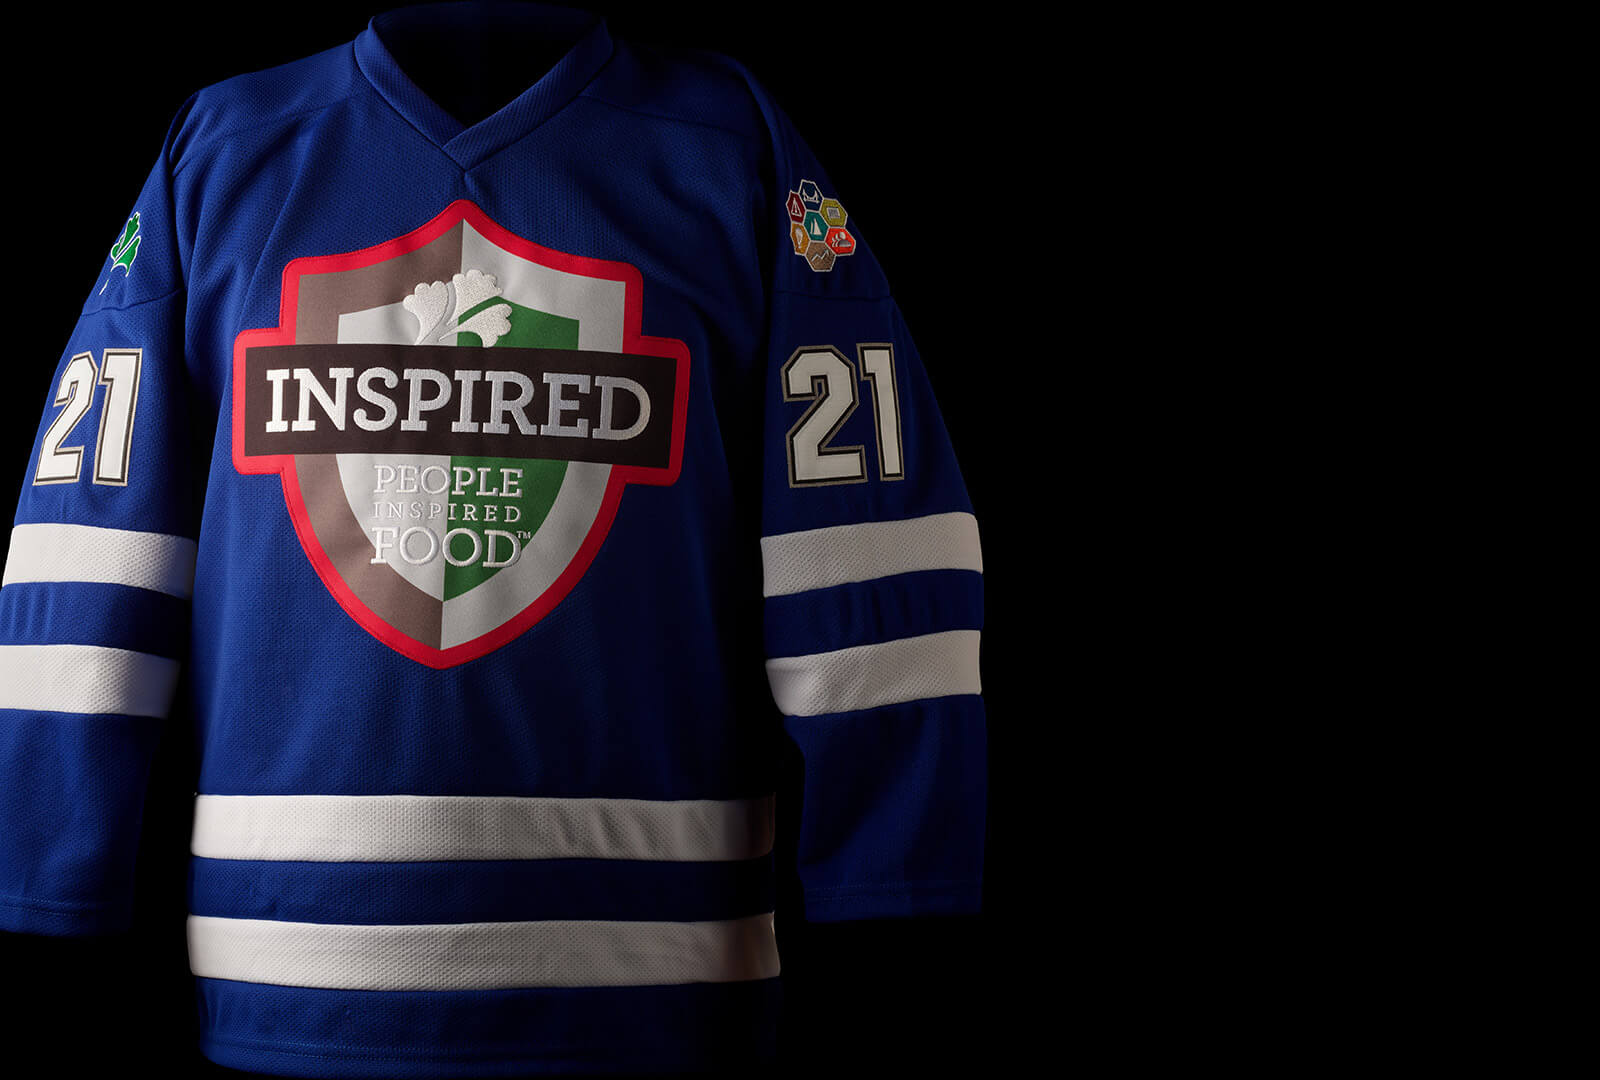 Canucks fans confused by hefty price tag on Pride warm-up jerseys